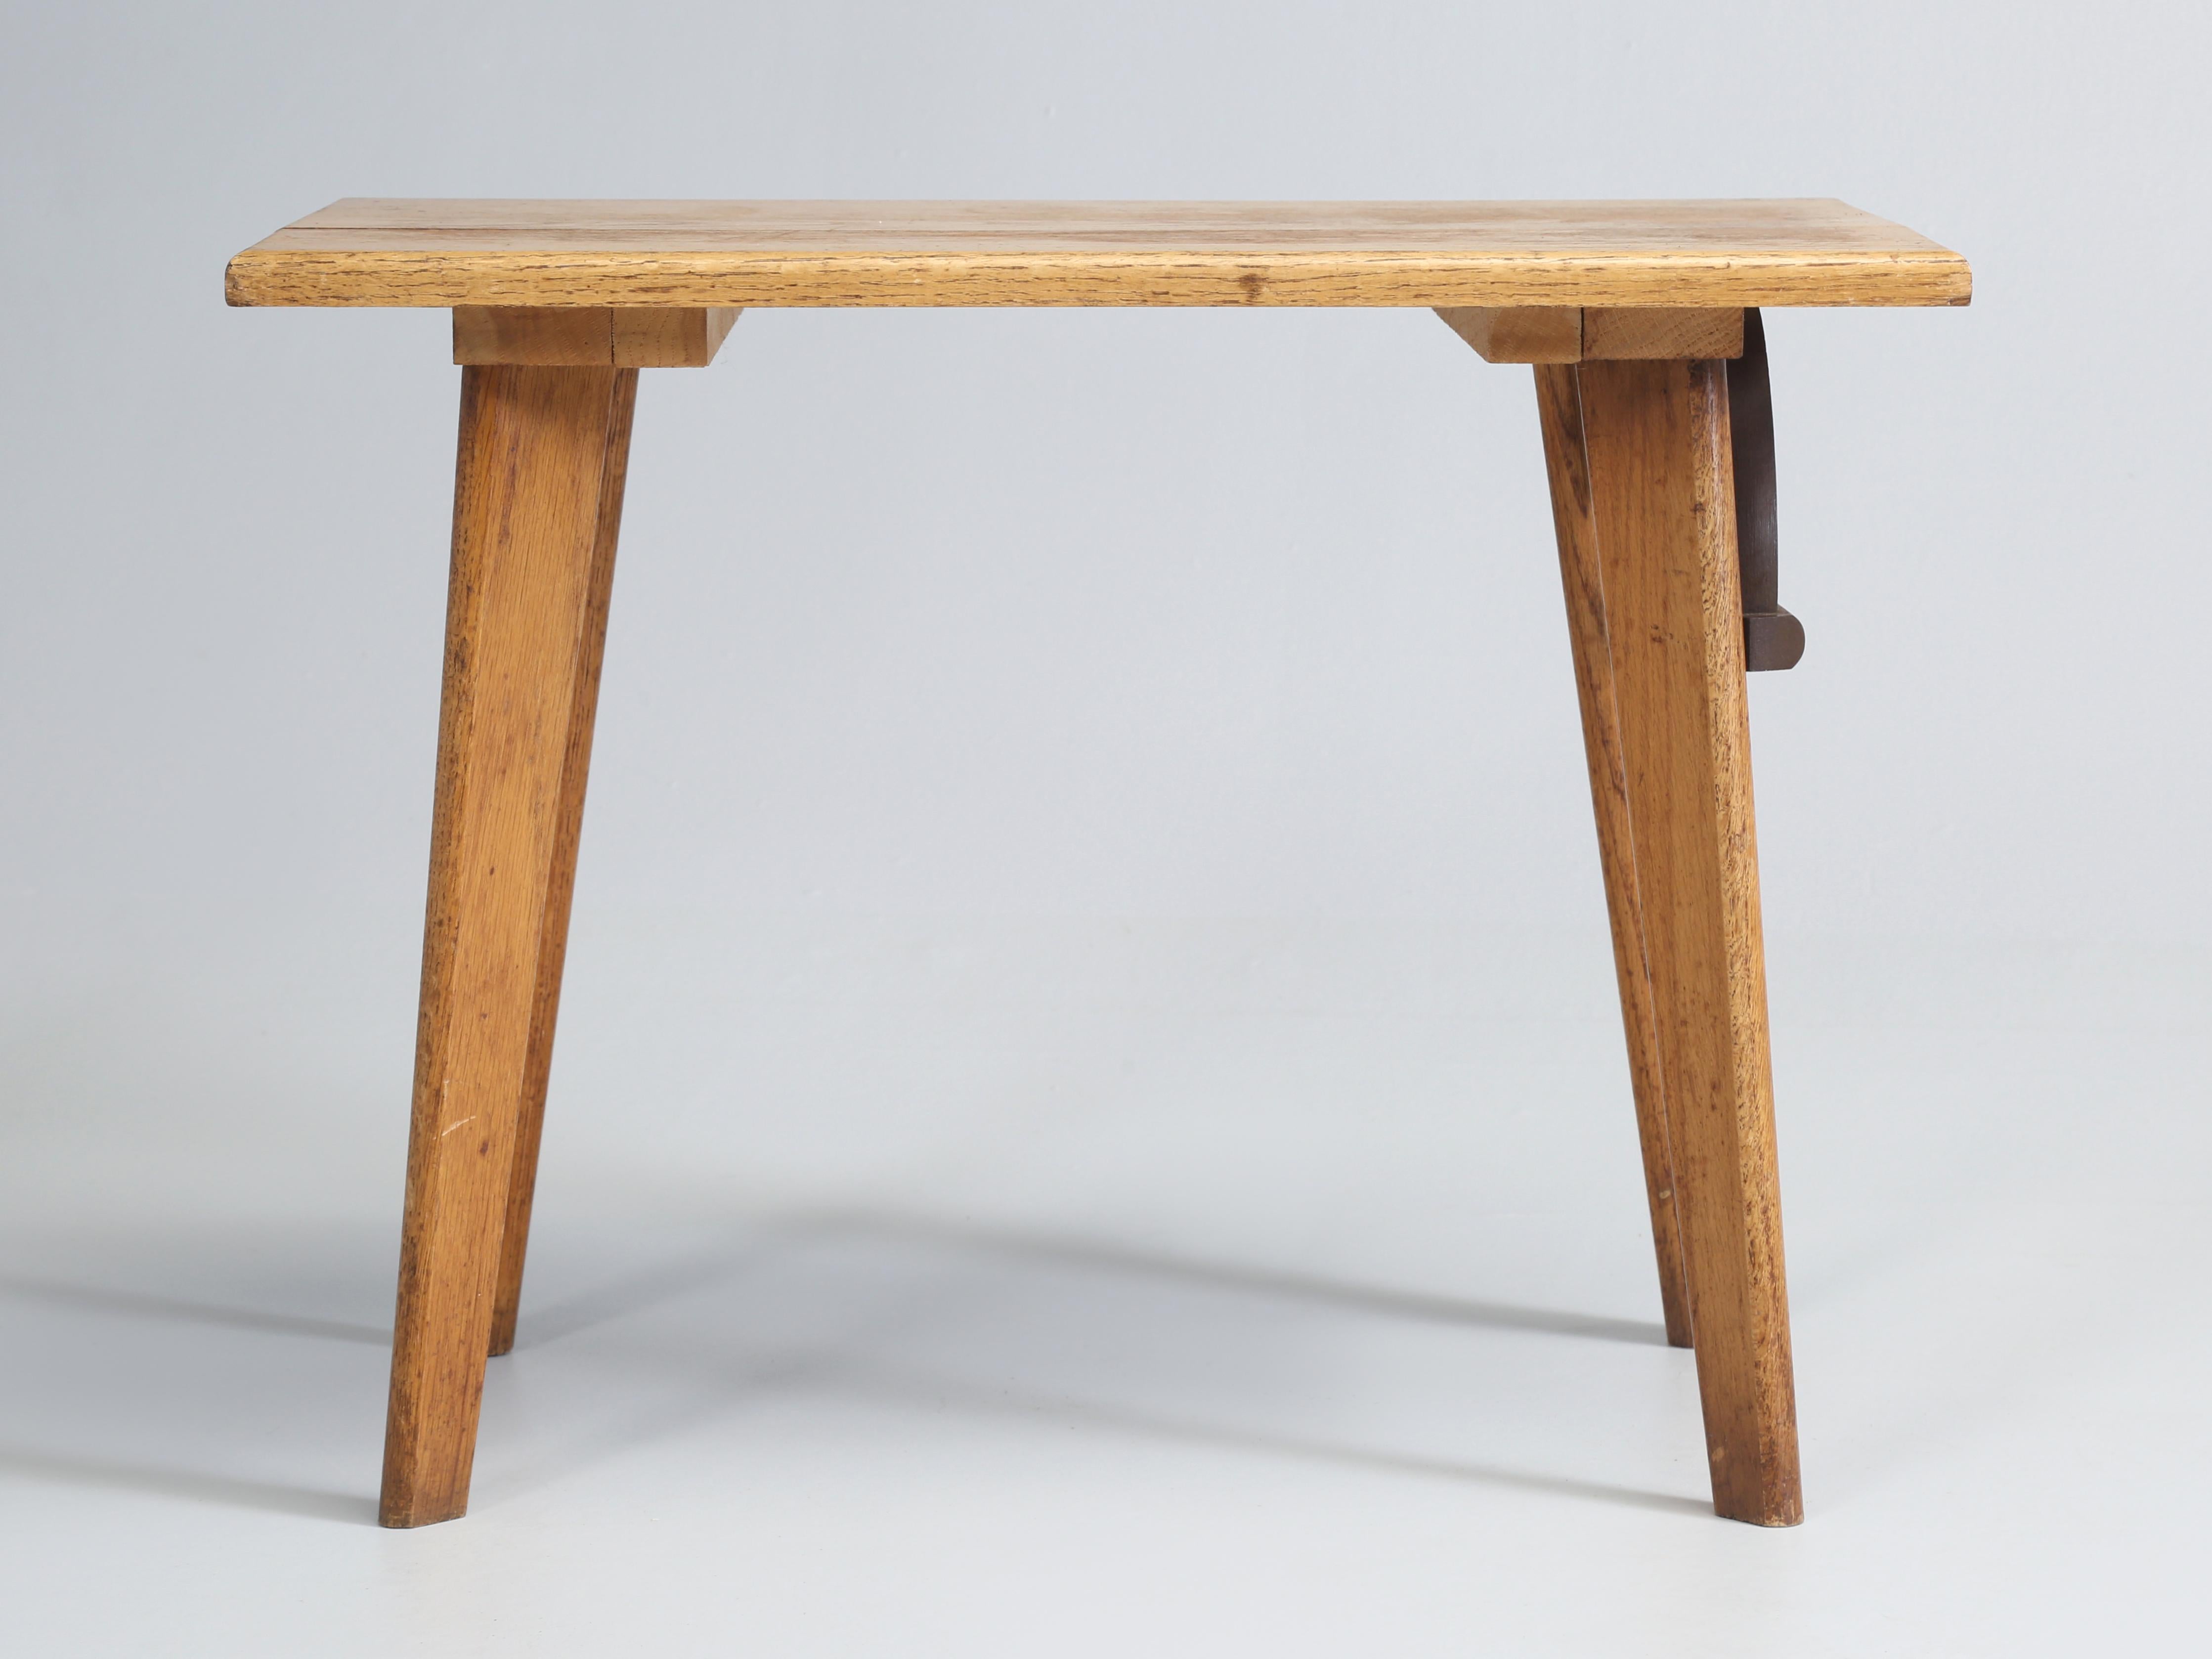 Vintage American Ranch Oak Original Side Table or End Table by A. Brandt and Sons of Fort Worth, Texas, who were manufacturers of solid and rustic home furnishings with a Cowboy theme. This great little solid Oak Table could easily work as an End